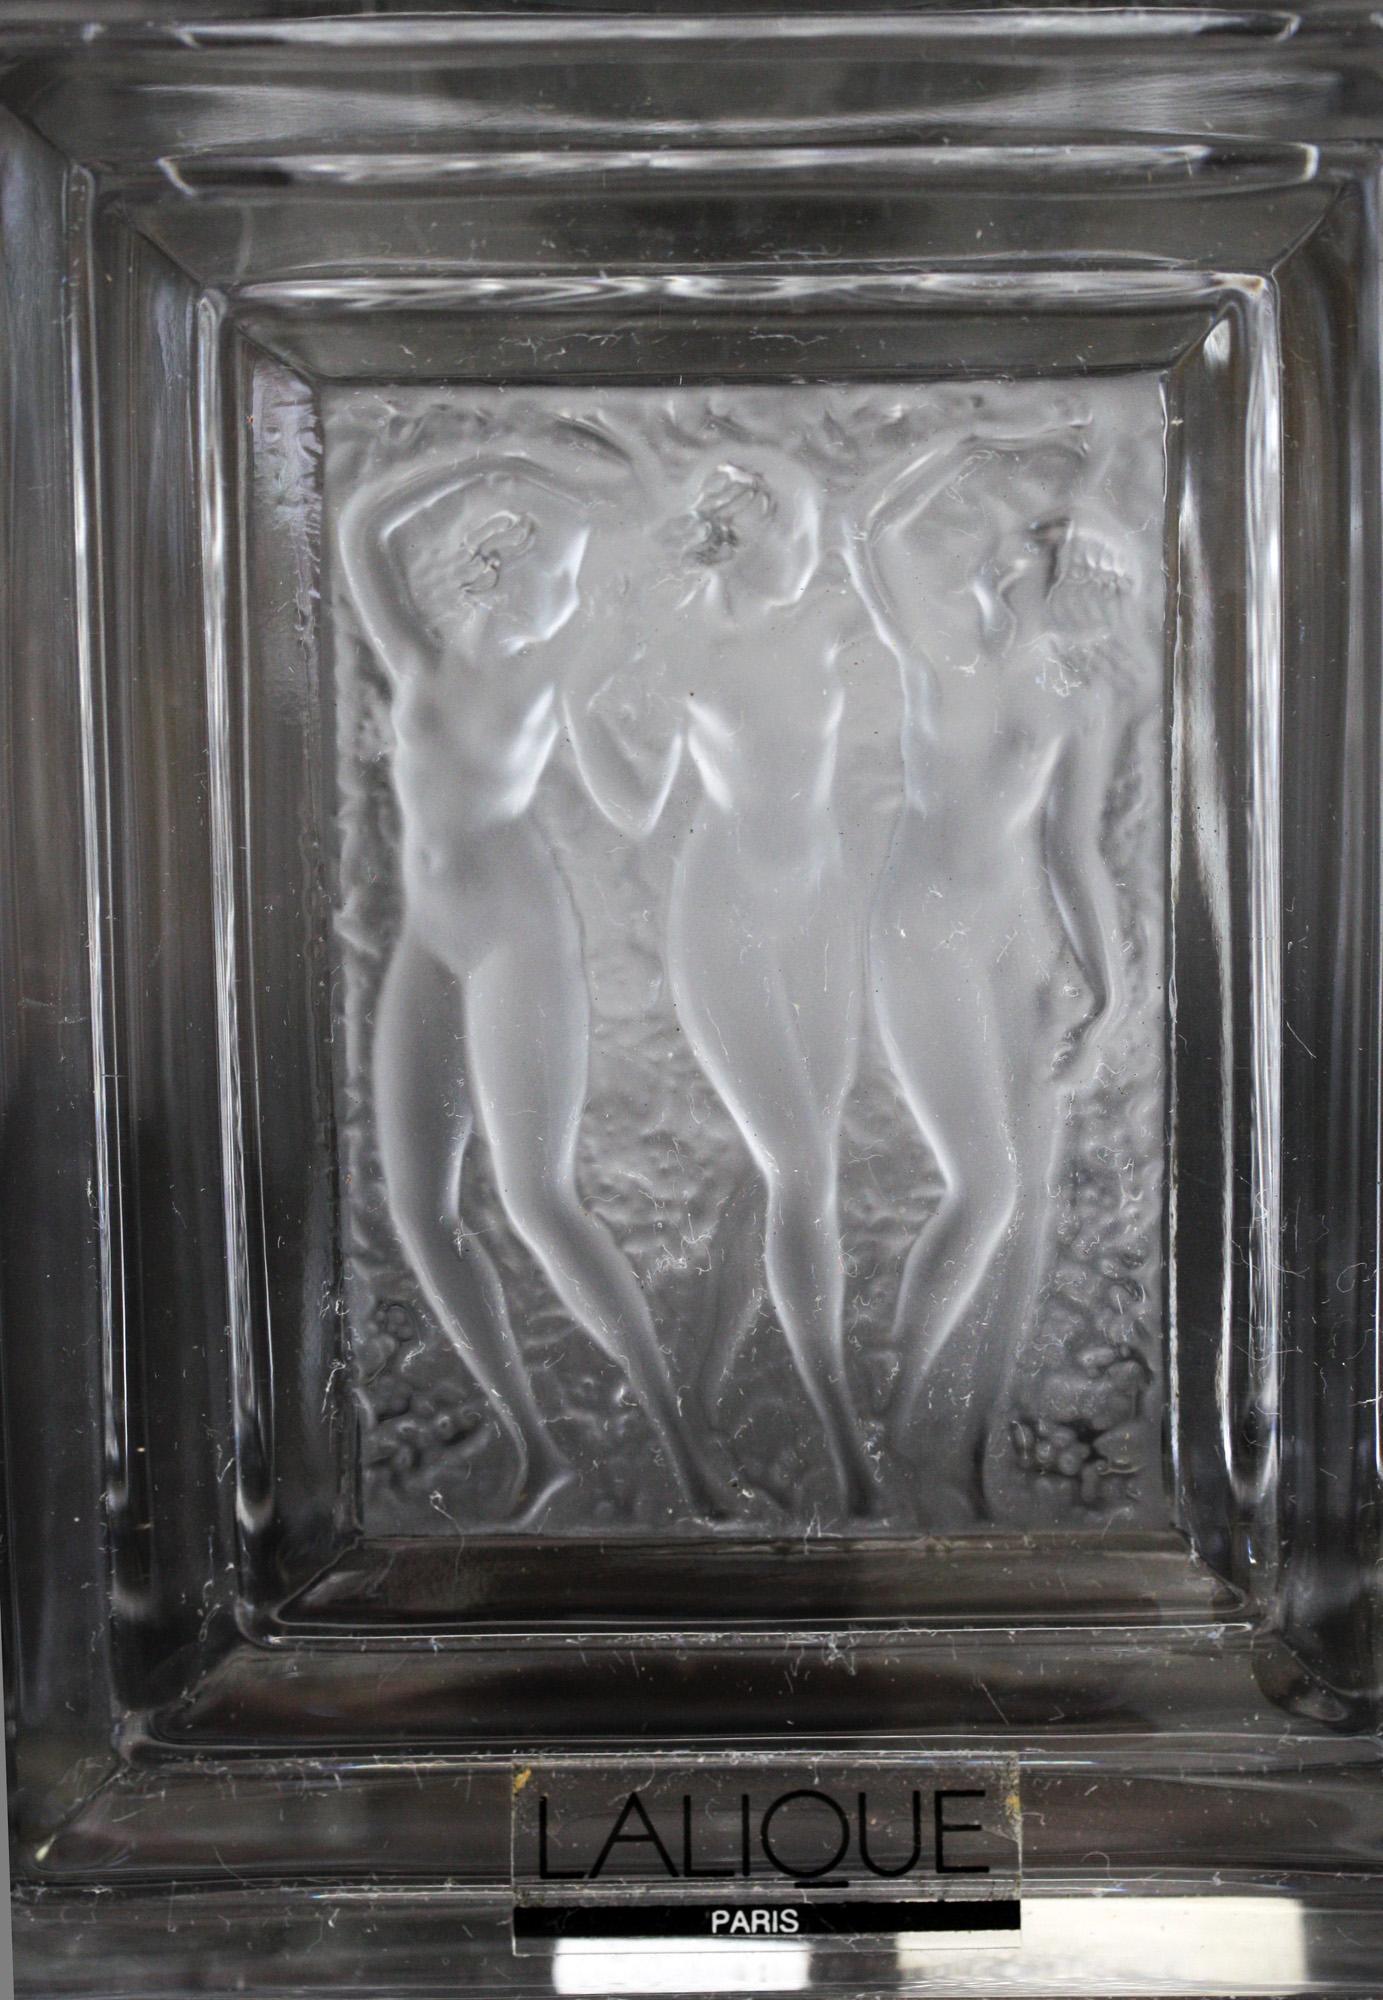 A stunning French Rene Lalique Duncan 2 scent bottle decorated with three frosted dancing nudes in relief dating from the 1970s. The bottle was inspired by American dancer Isadora Duncan and was made in varying sizes. The rectangular shaped bottle